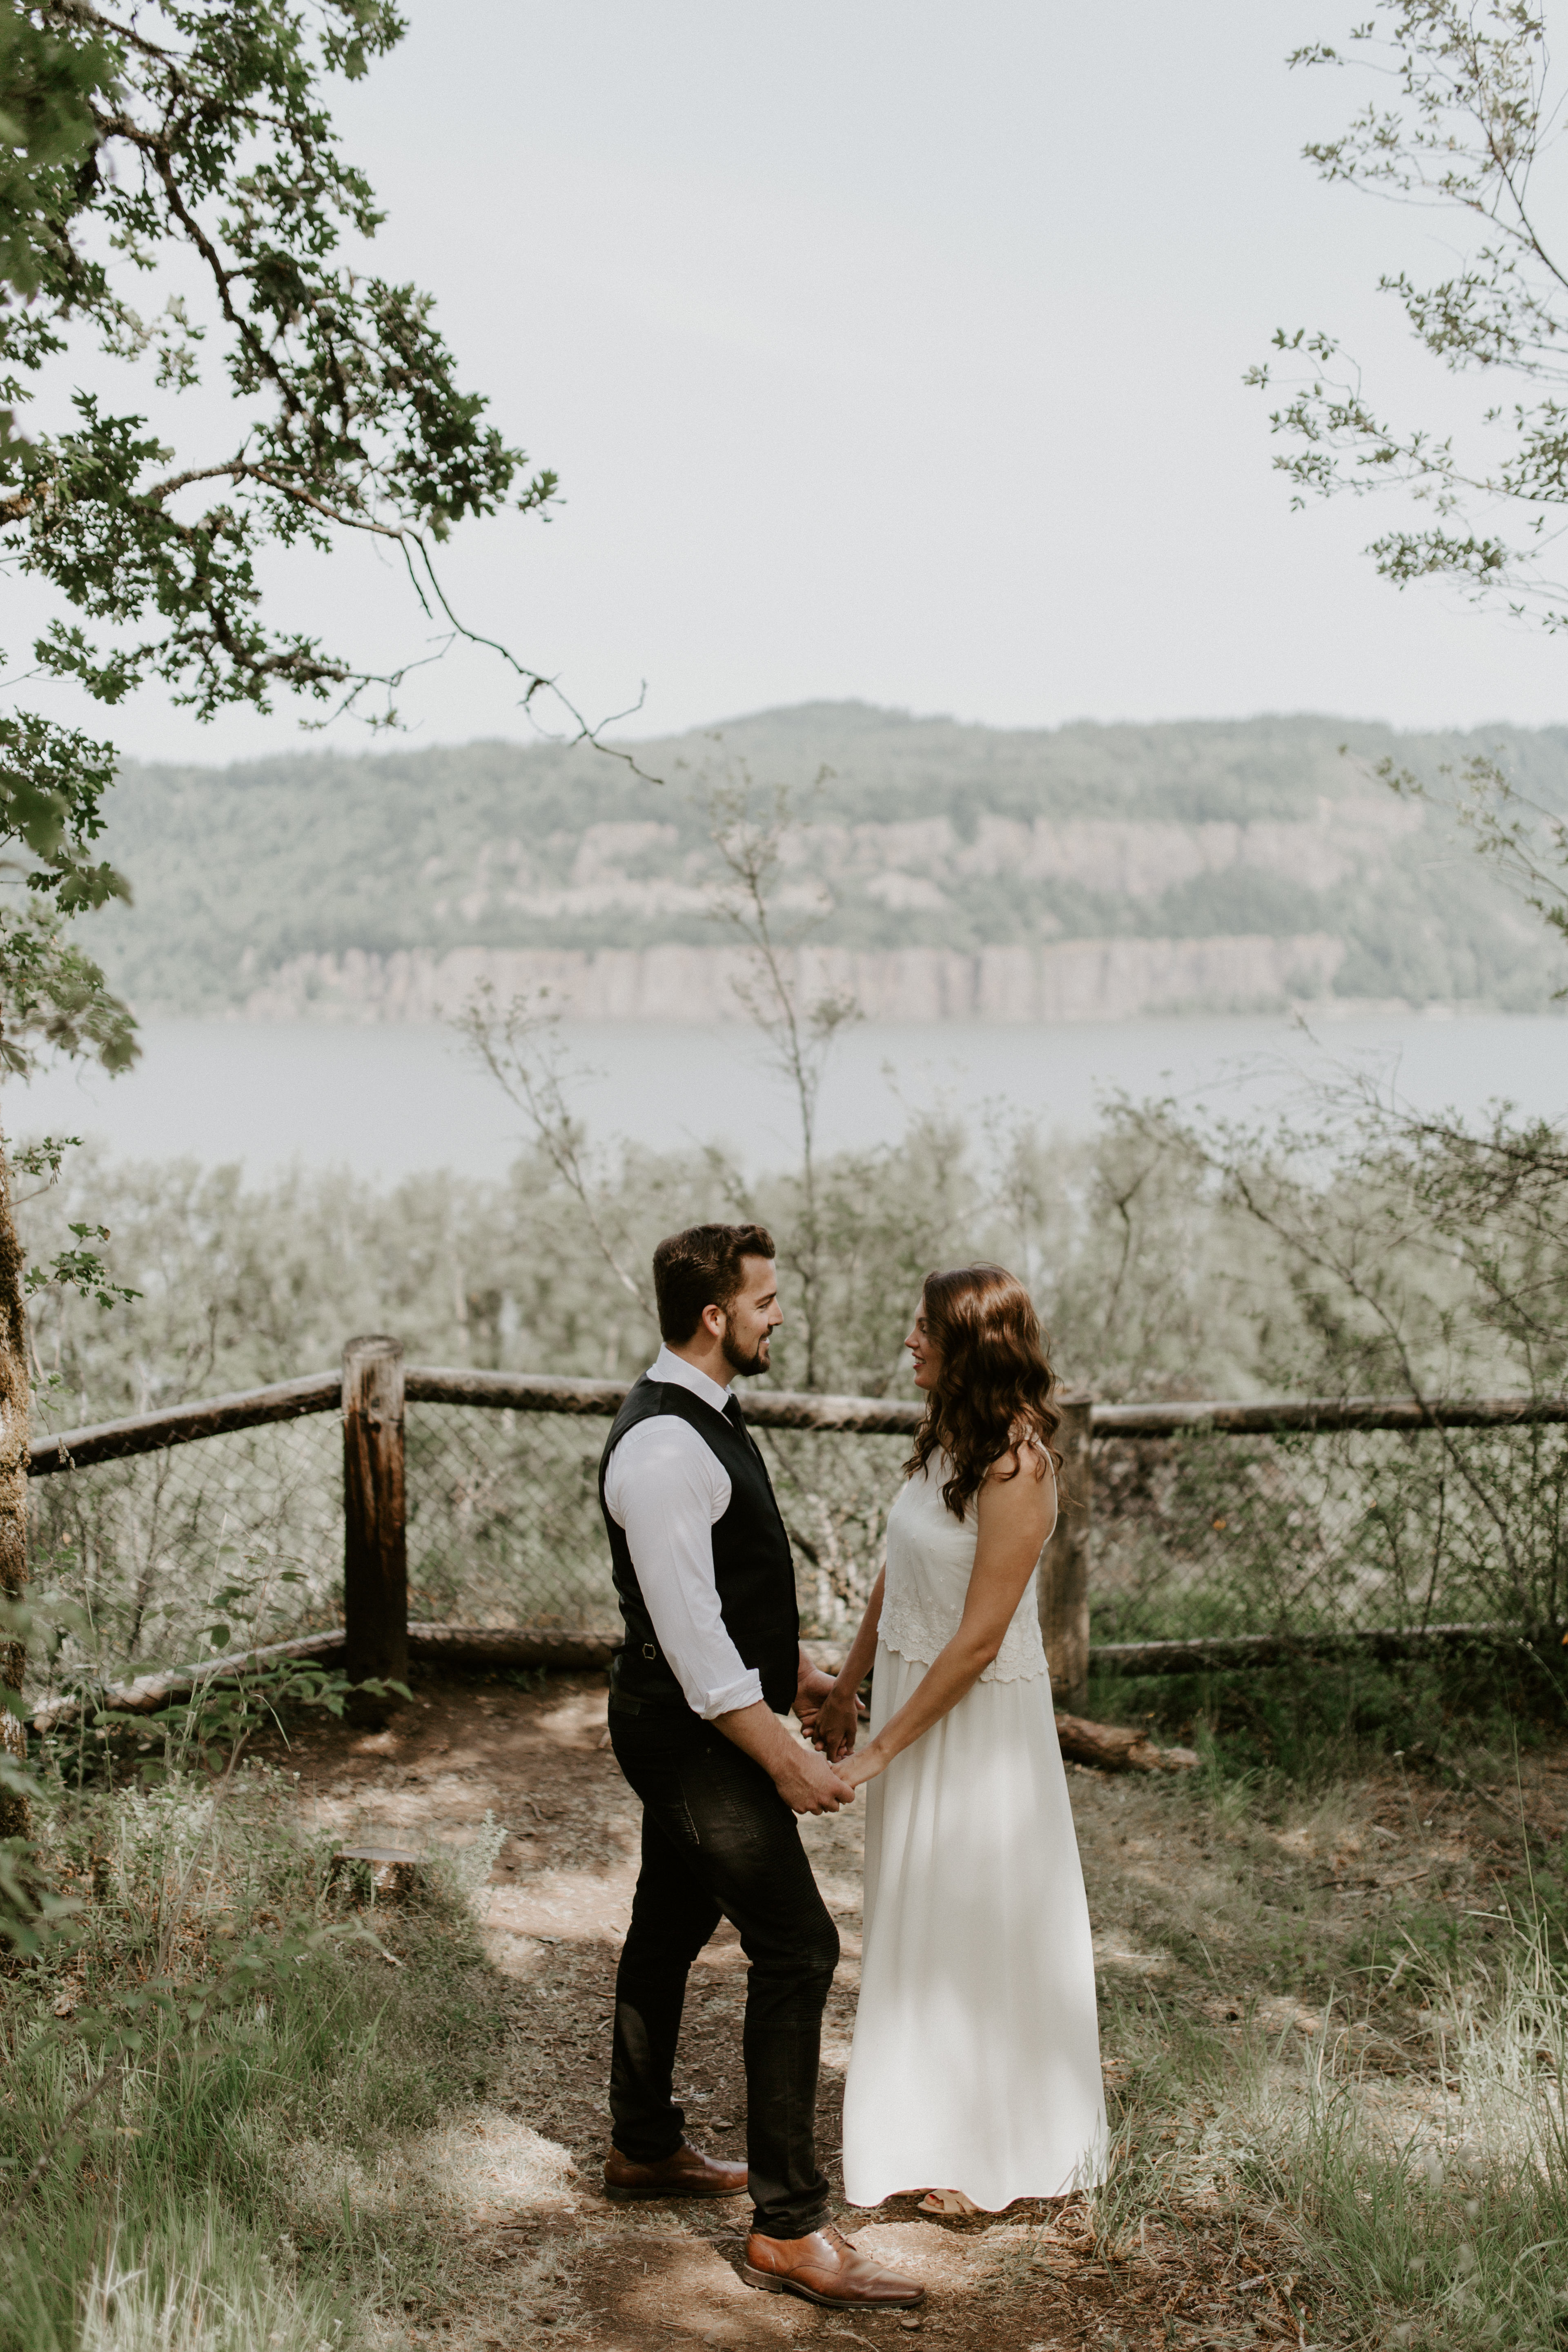 Emily and Josh holding hands at Bridal Veil Falls, Oregon. Elopement photography in Portland Oregon by Sienna Plus Josh.